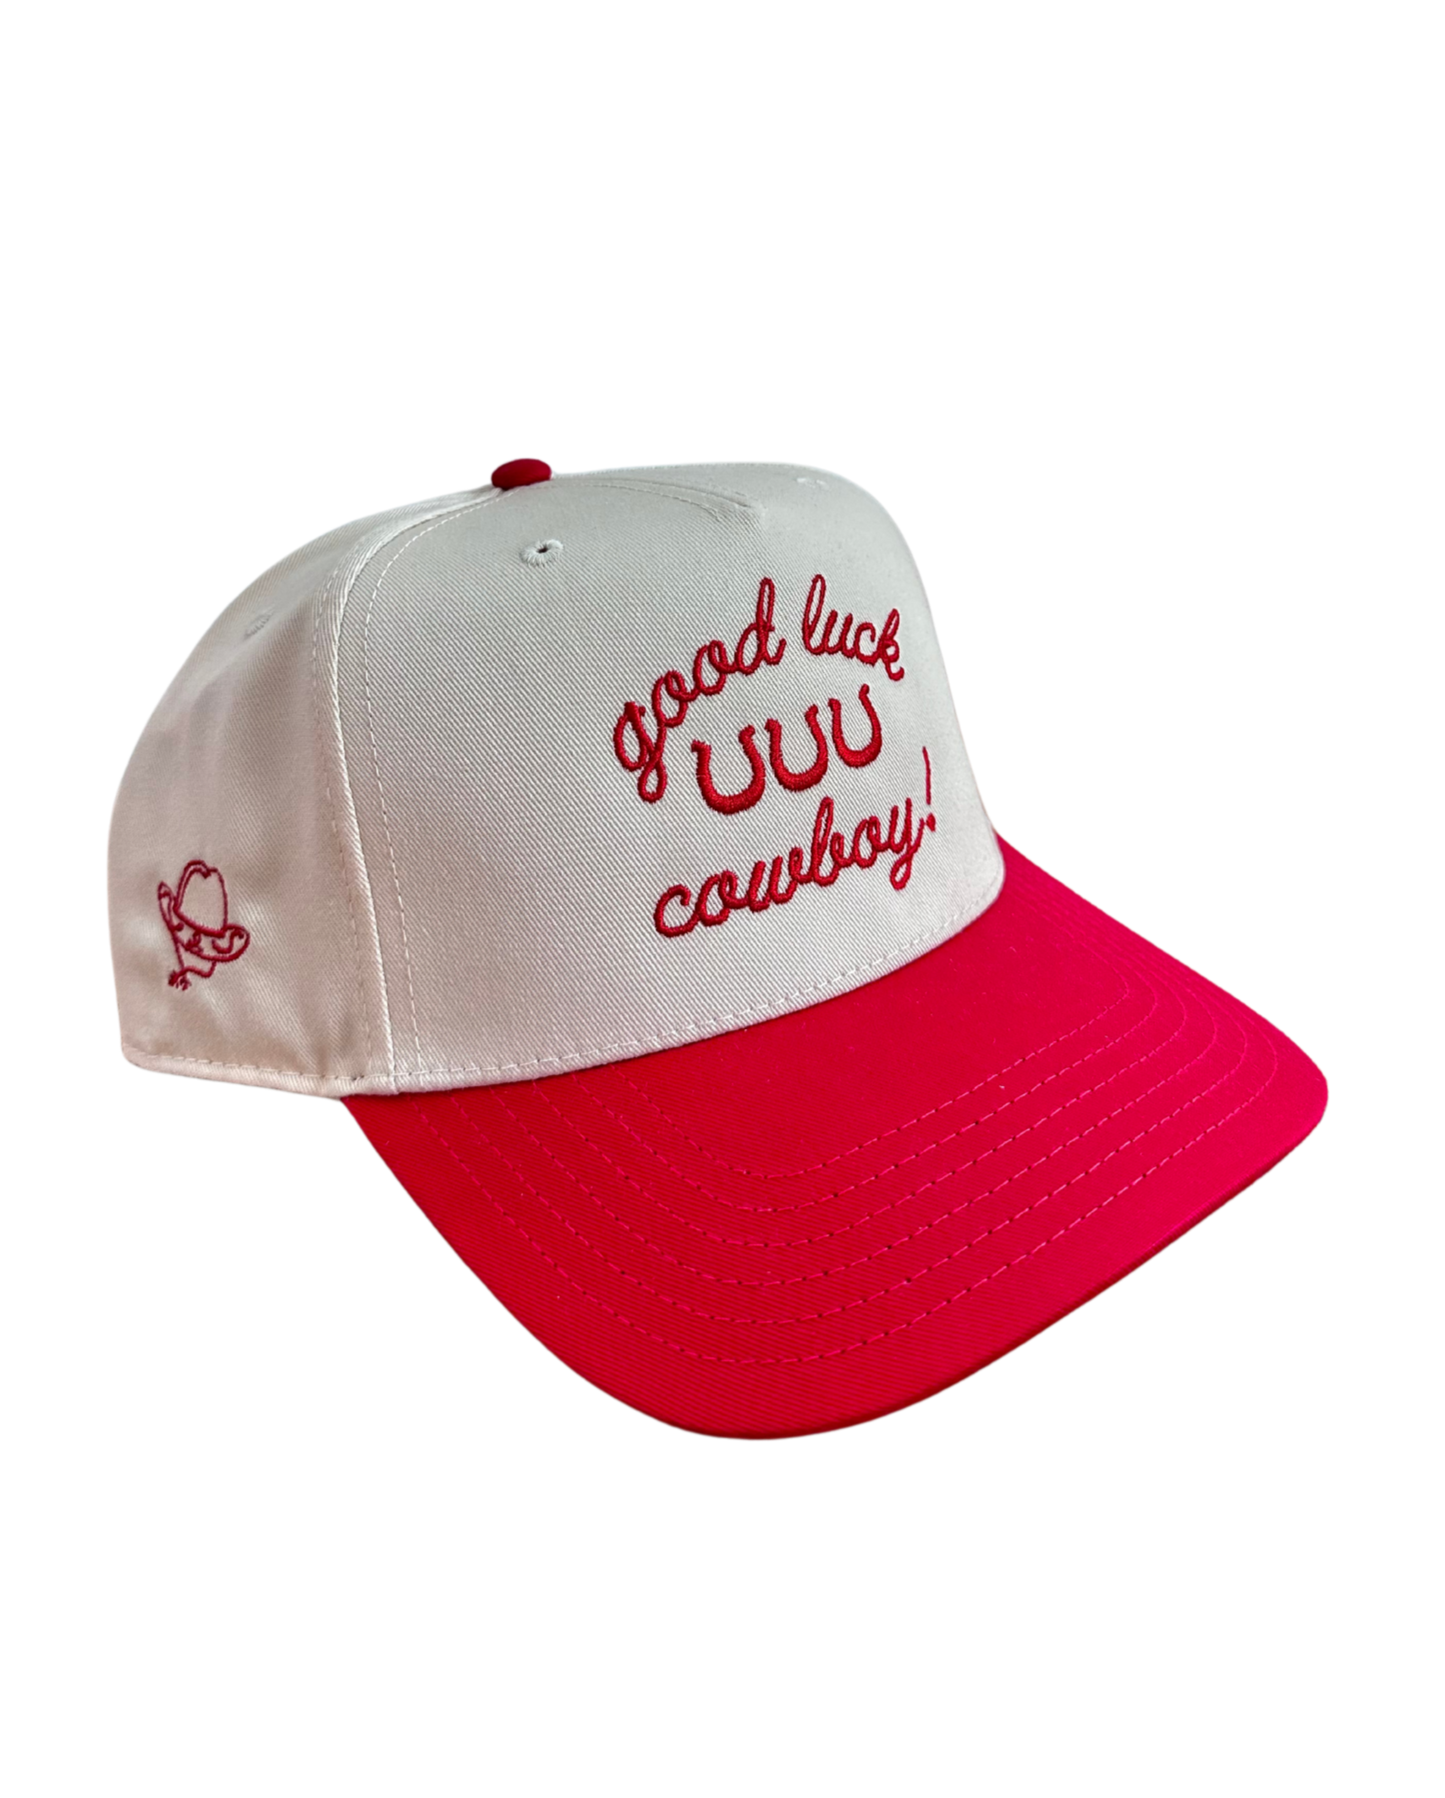 GOOD LUCK COWBOY! ® HAT IN RED